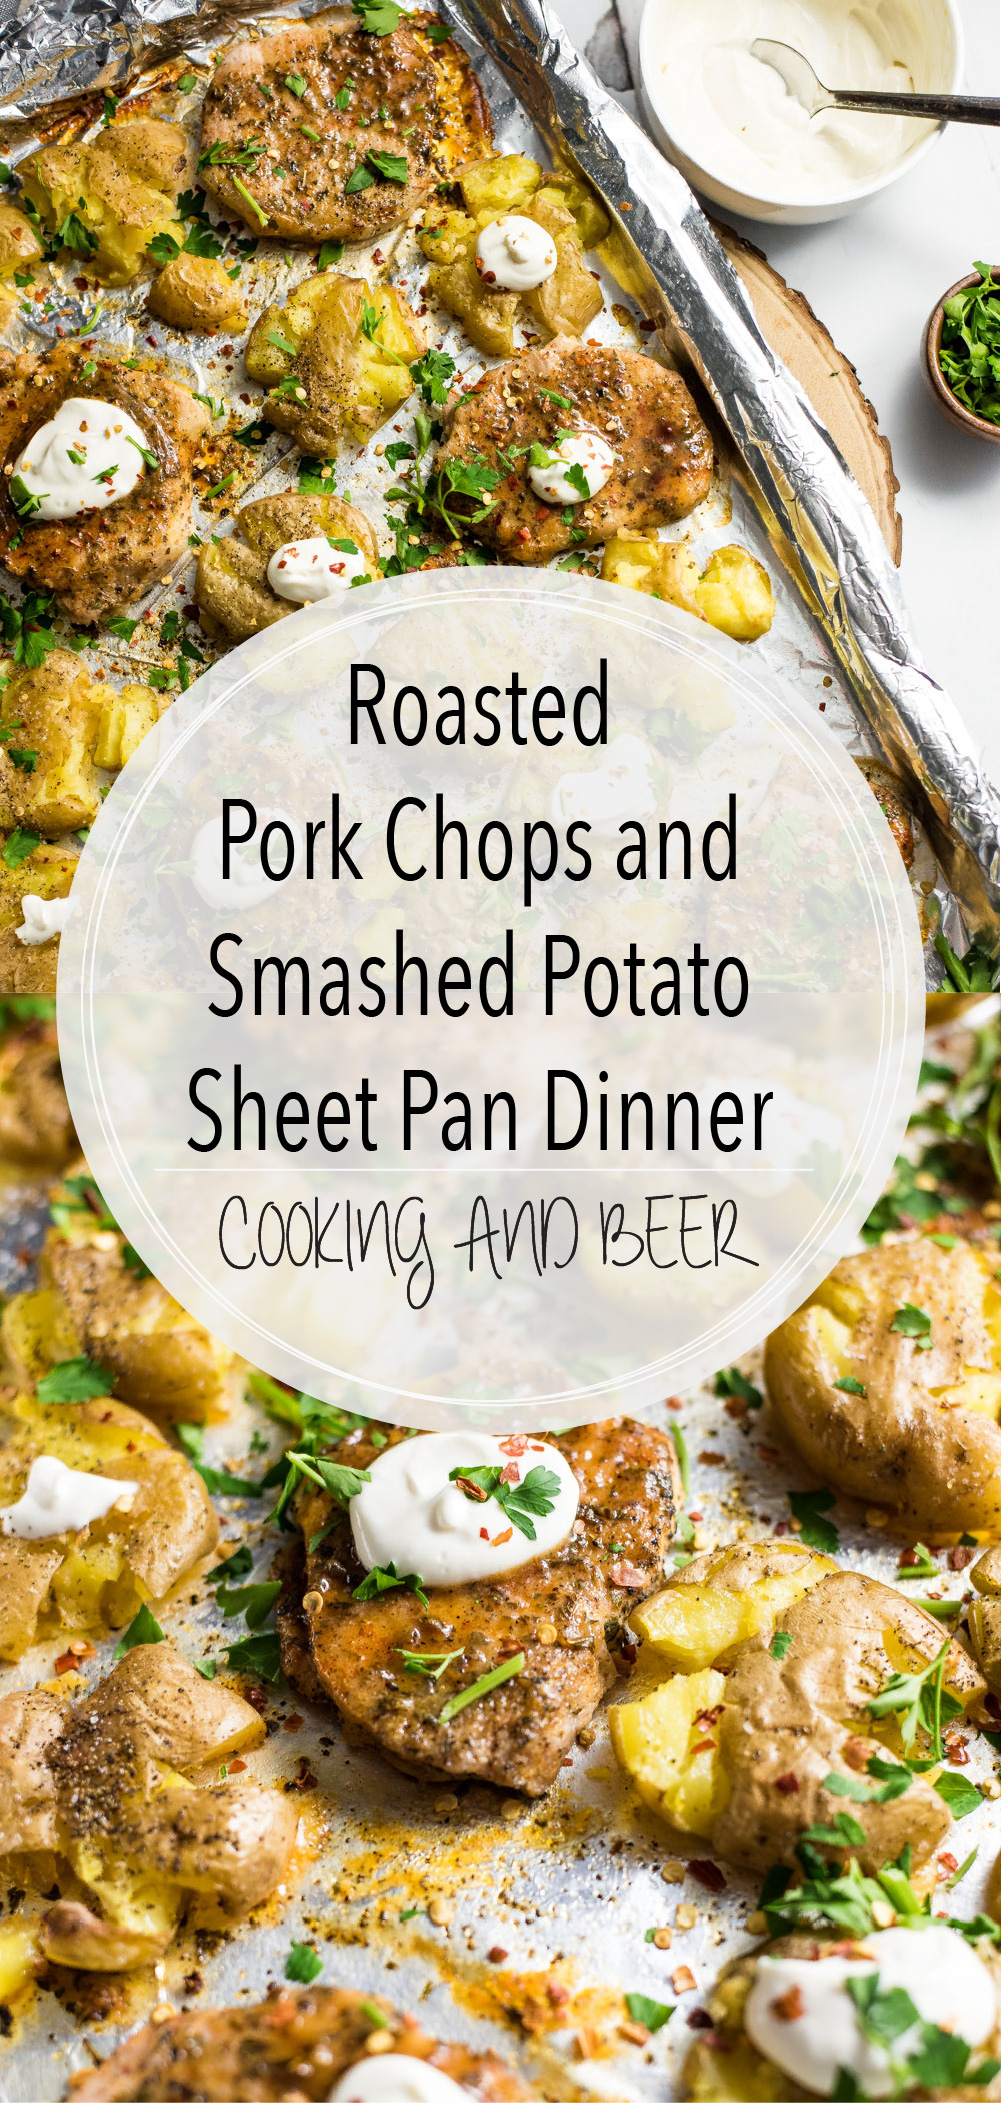 Roasted Pork Chops and Smashed Potato Sheet Pan Dinner is a super flavorful and simple way to spruce up a weeknight dinner recipe!